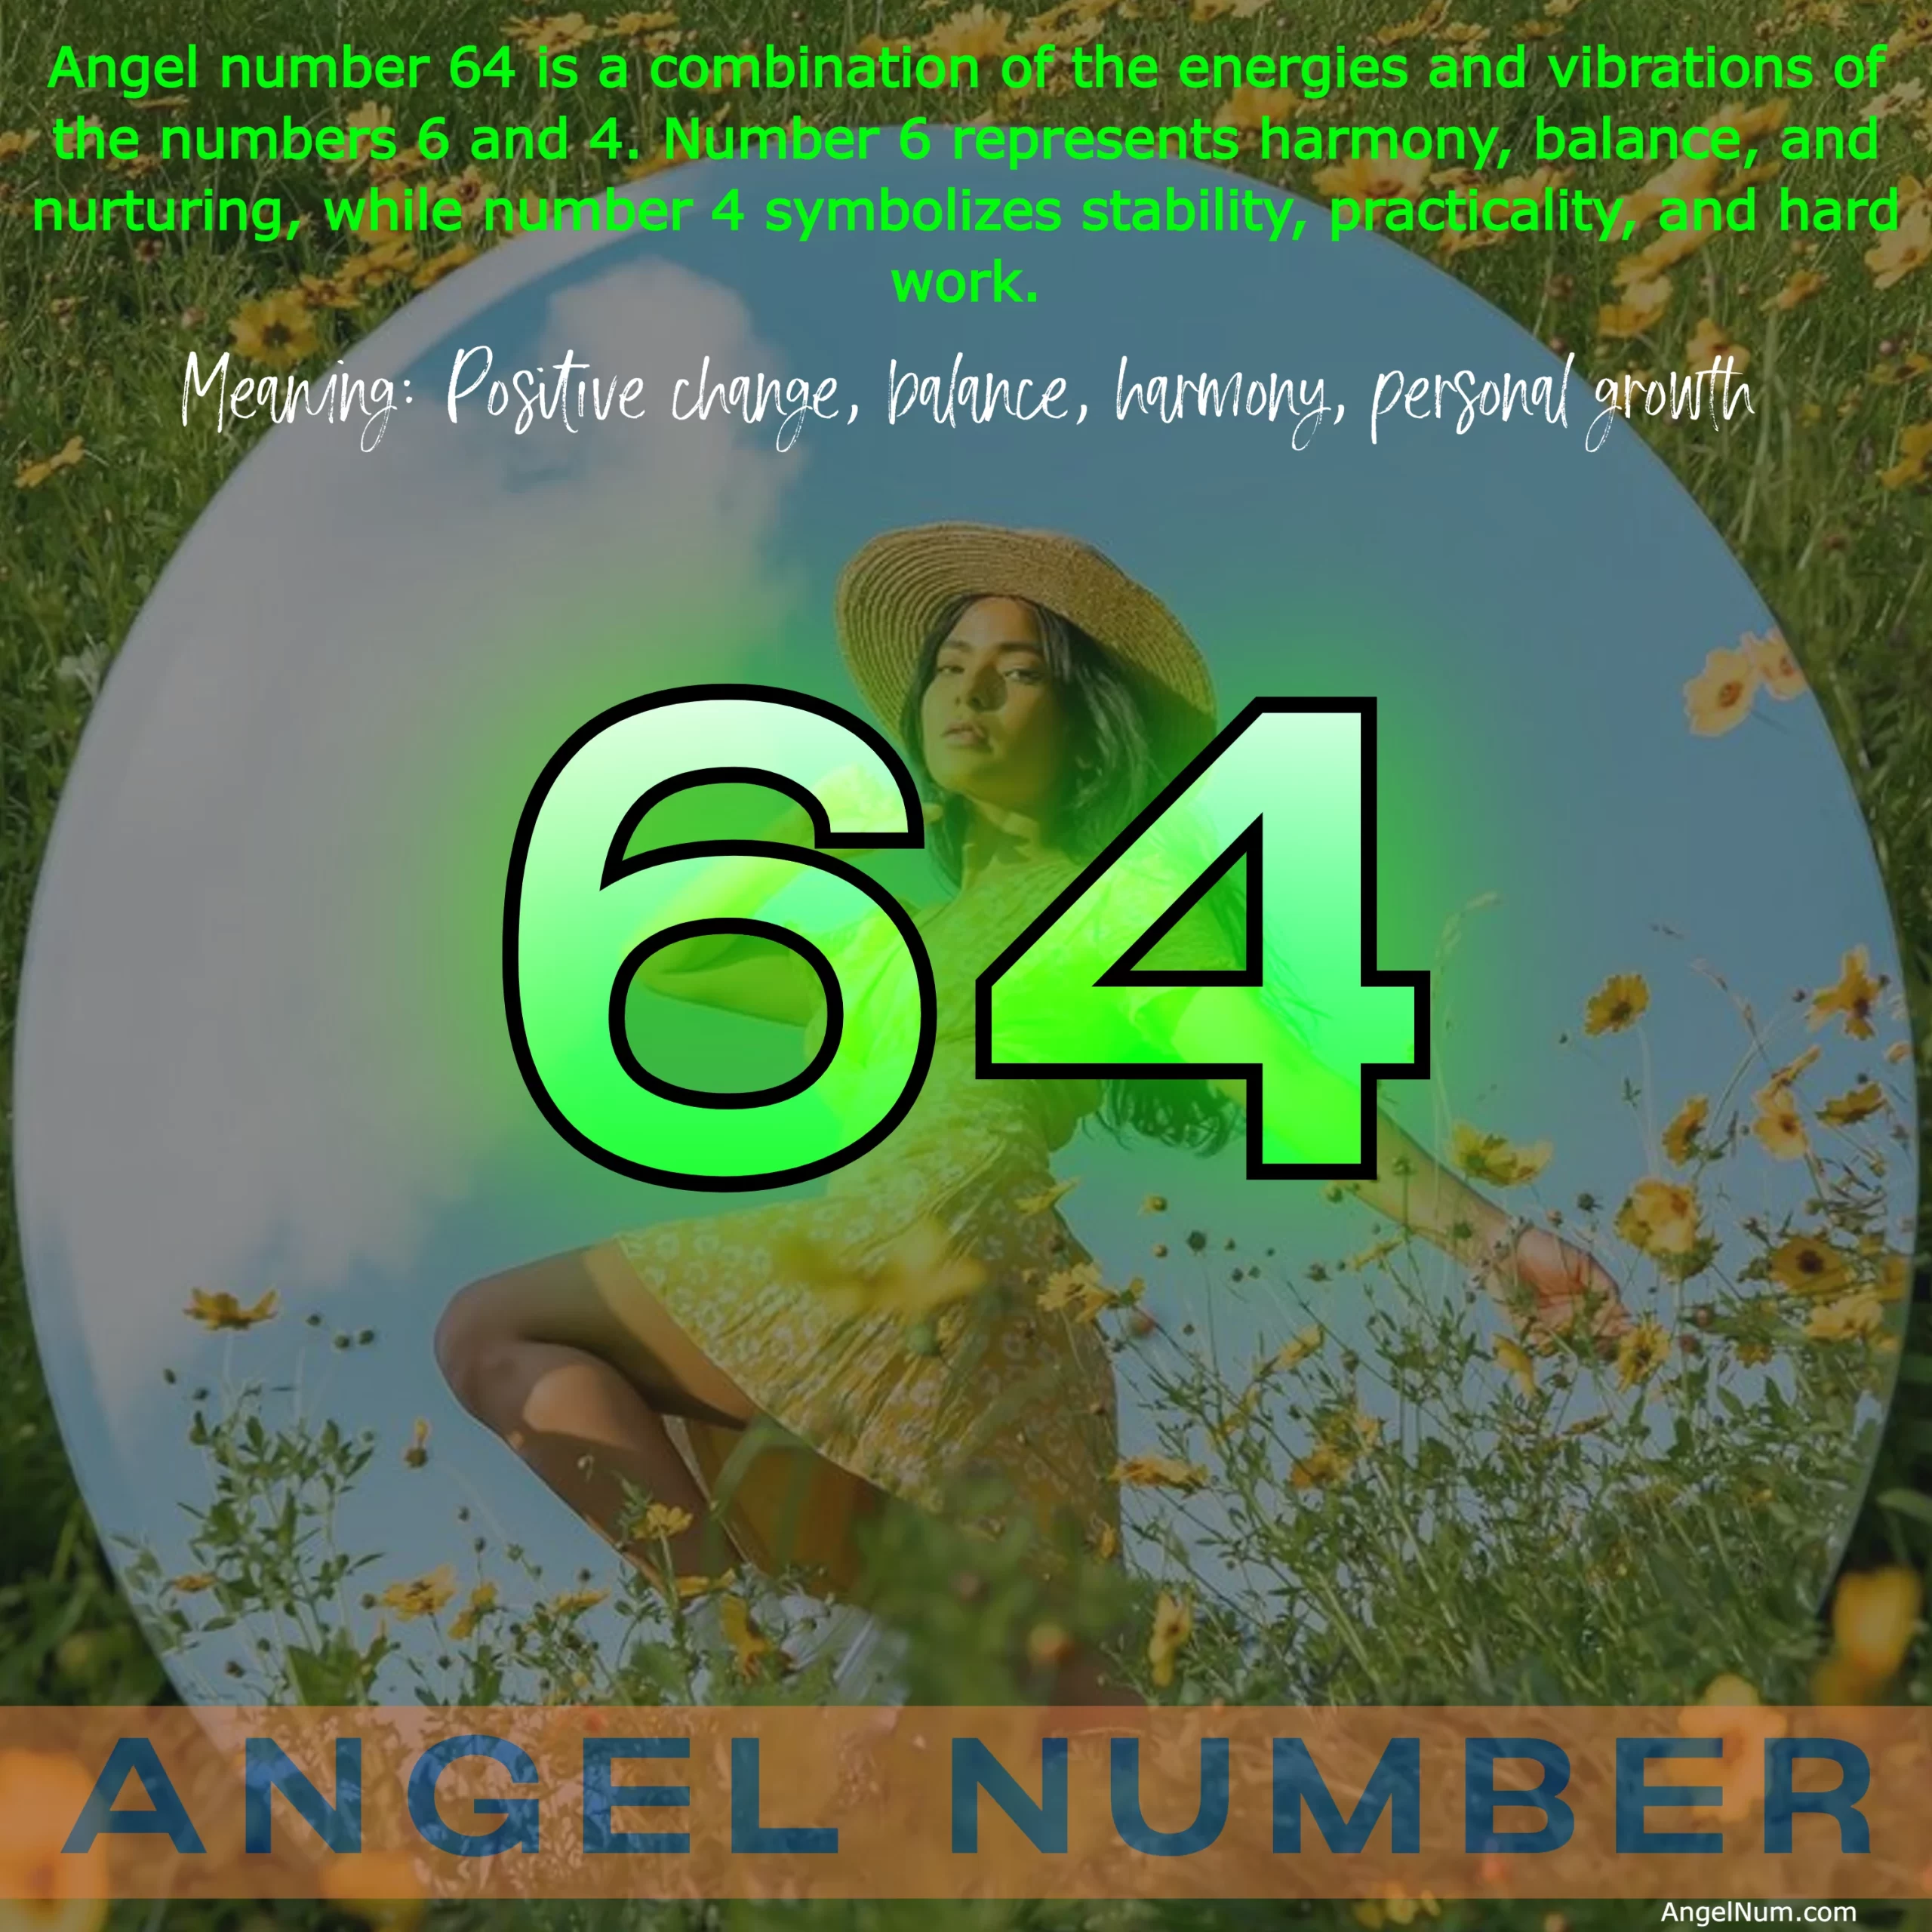 Angel Number 64: Embrace Positive Change and Balance in Life